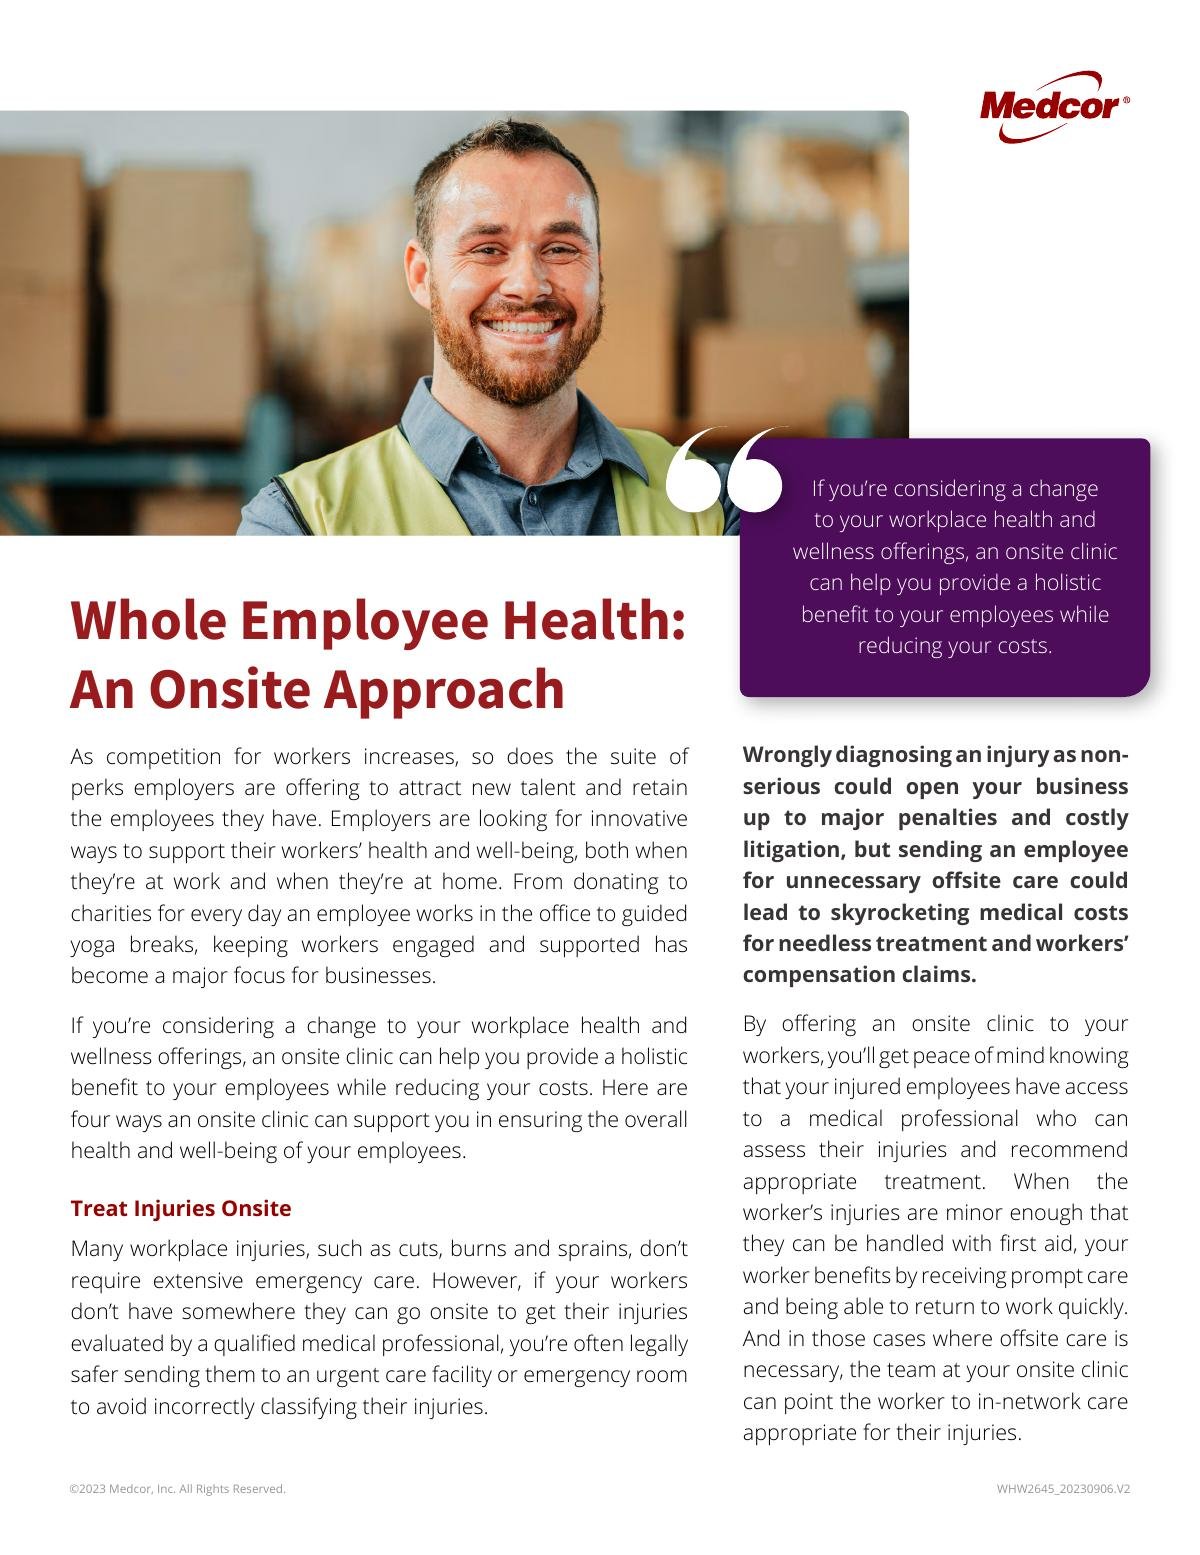 Whole Employee Health: An Onsite Approach